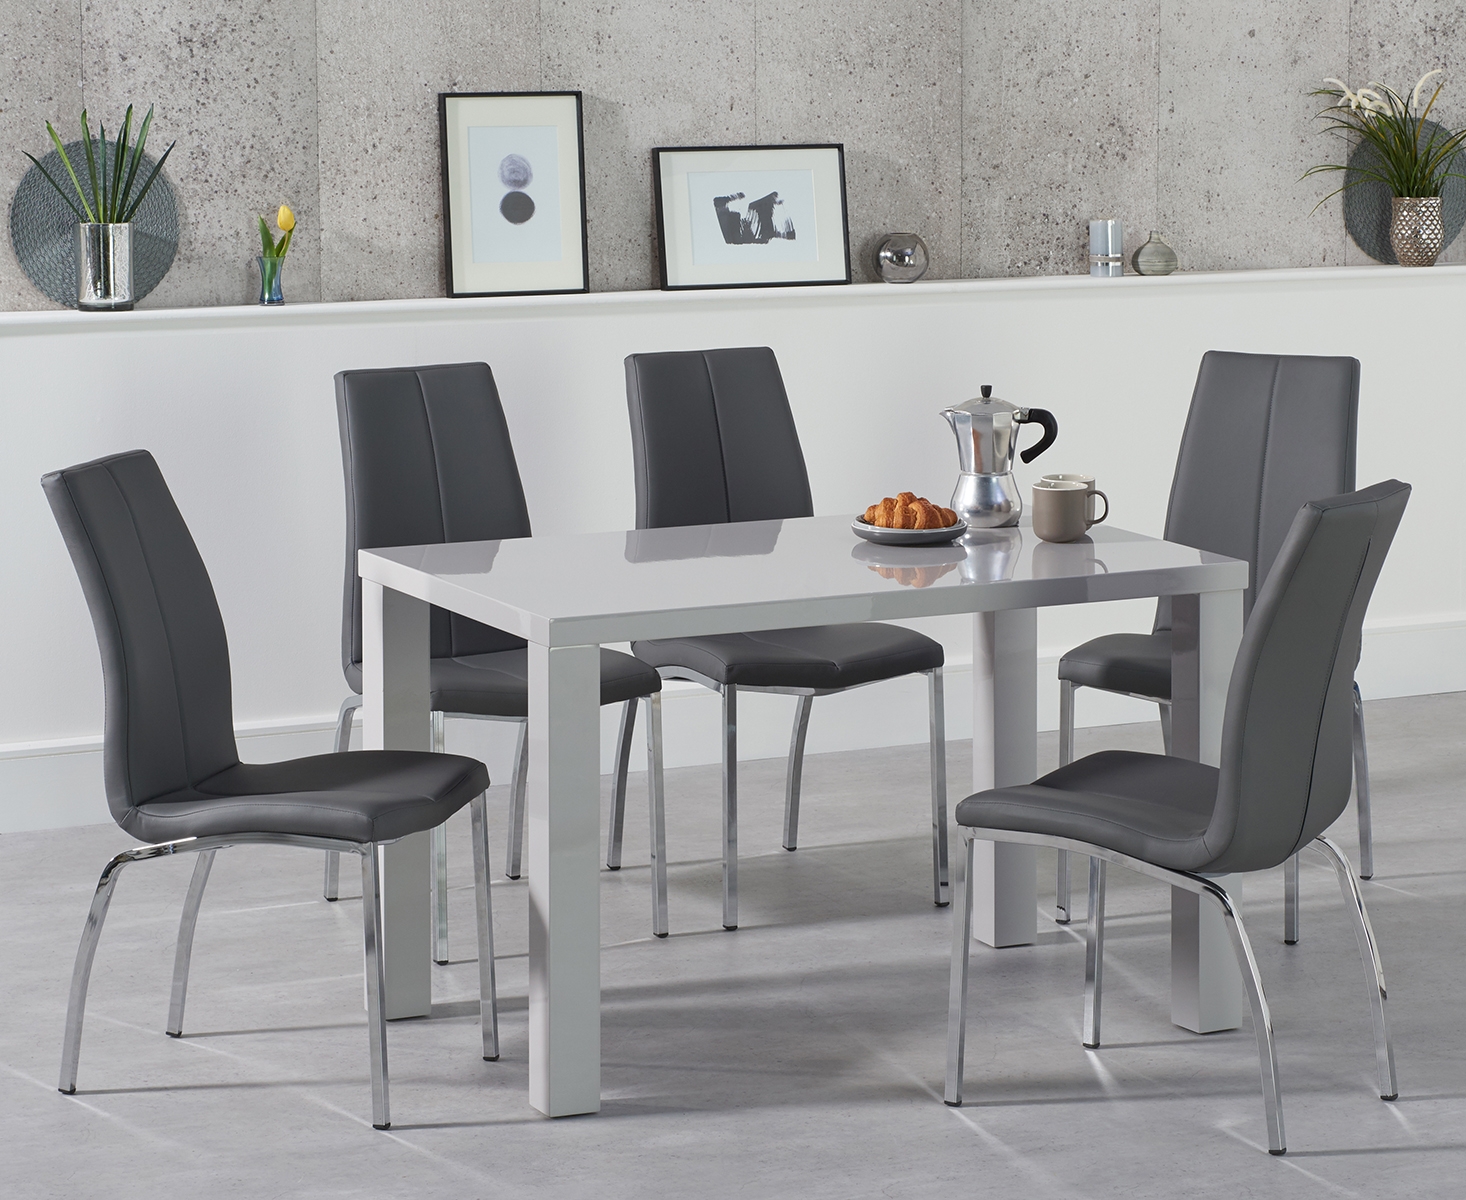 Atlanta 120cm Light Grey Gloss Dining Table With 4 Black Cavello Chairs